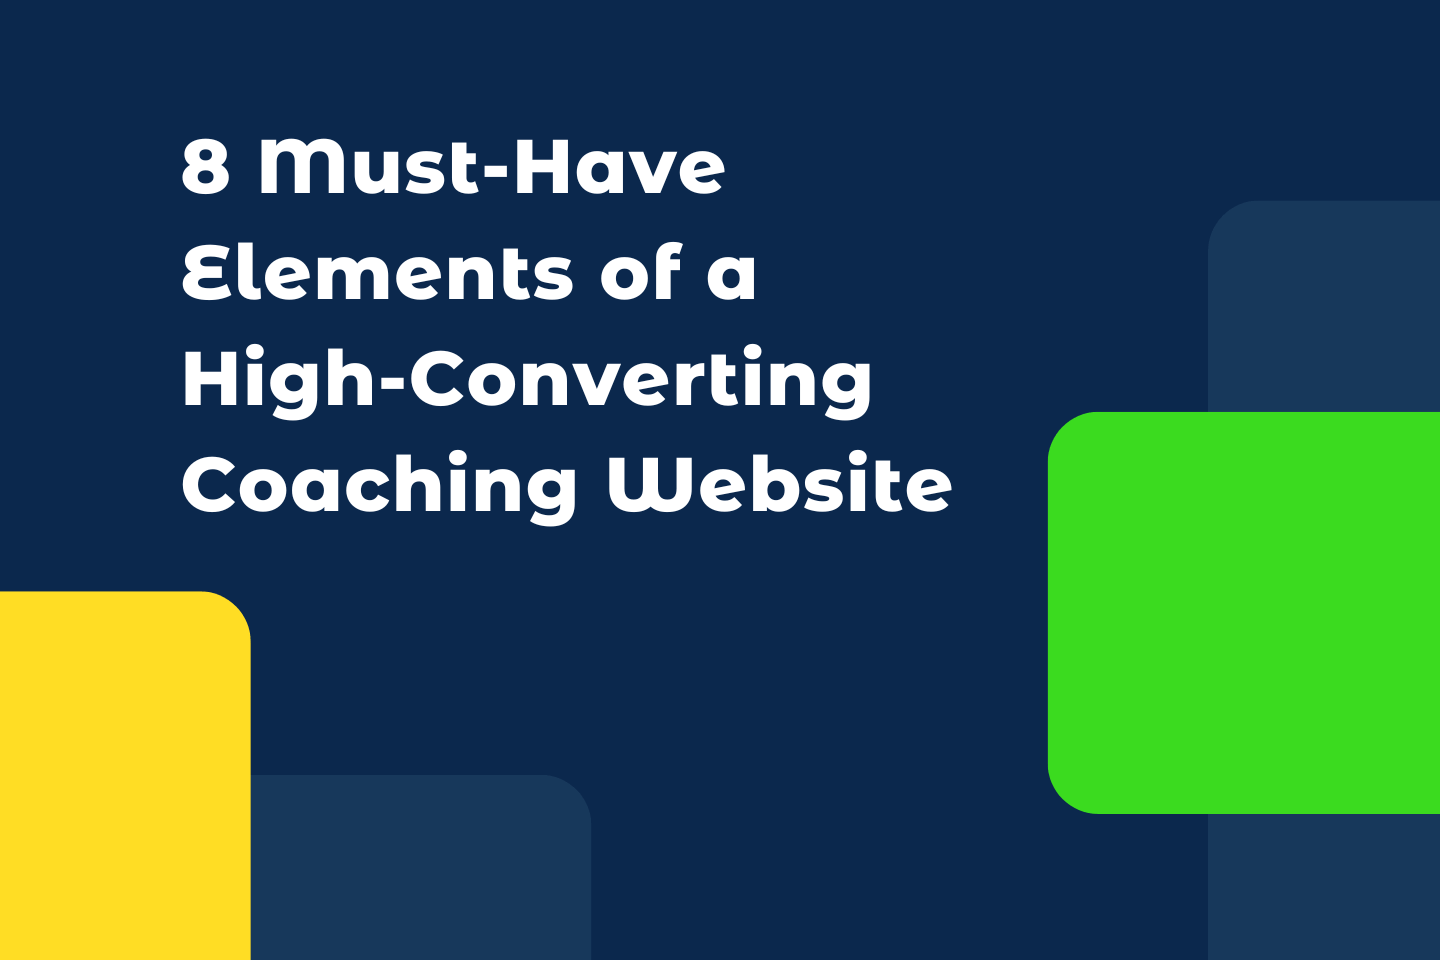 8 Must-Have Elements of a High-Converting Coaching Website